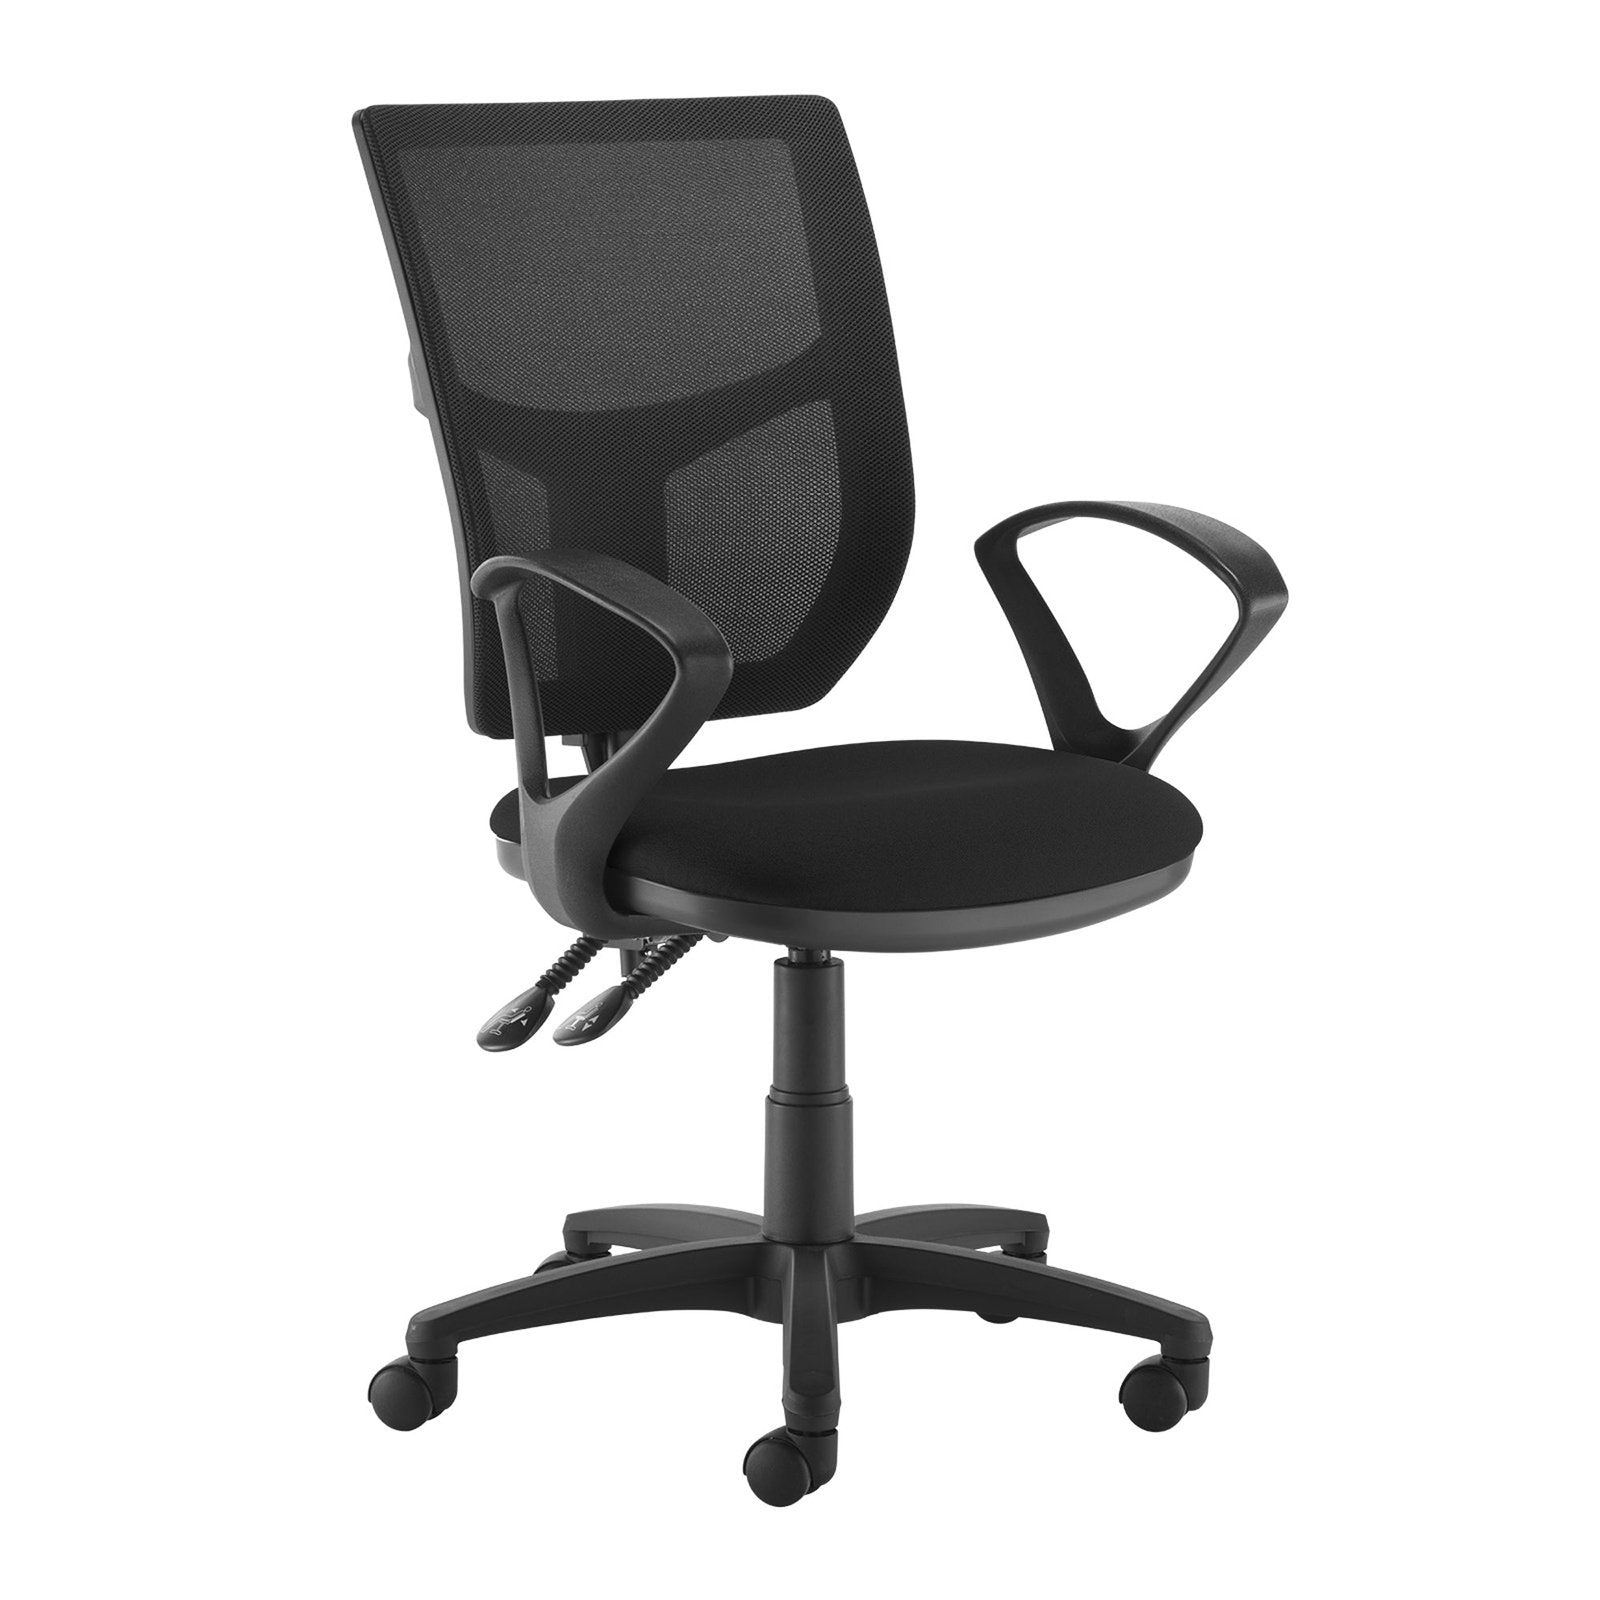 Altino 2 lever high mesh back operators chair - Office Products Online